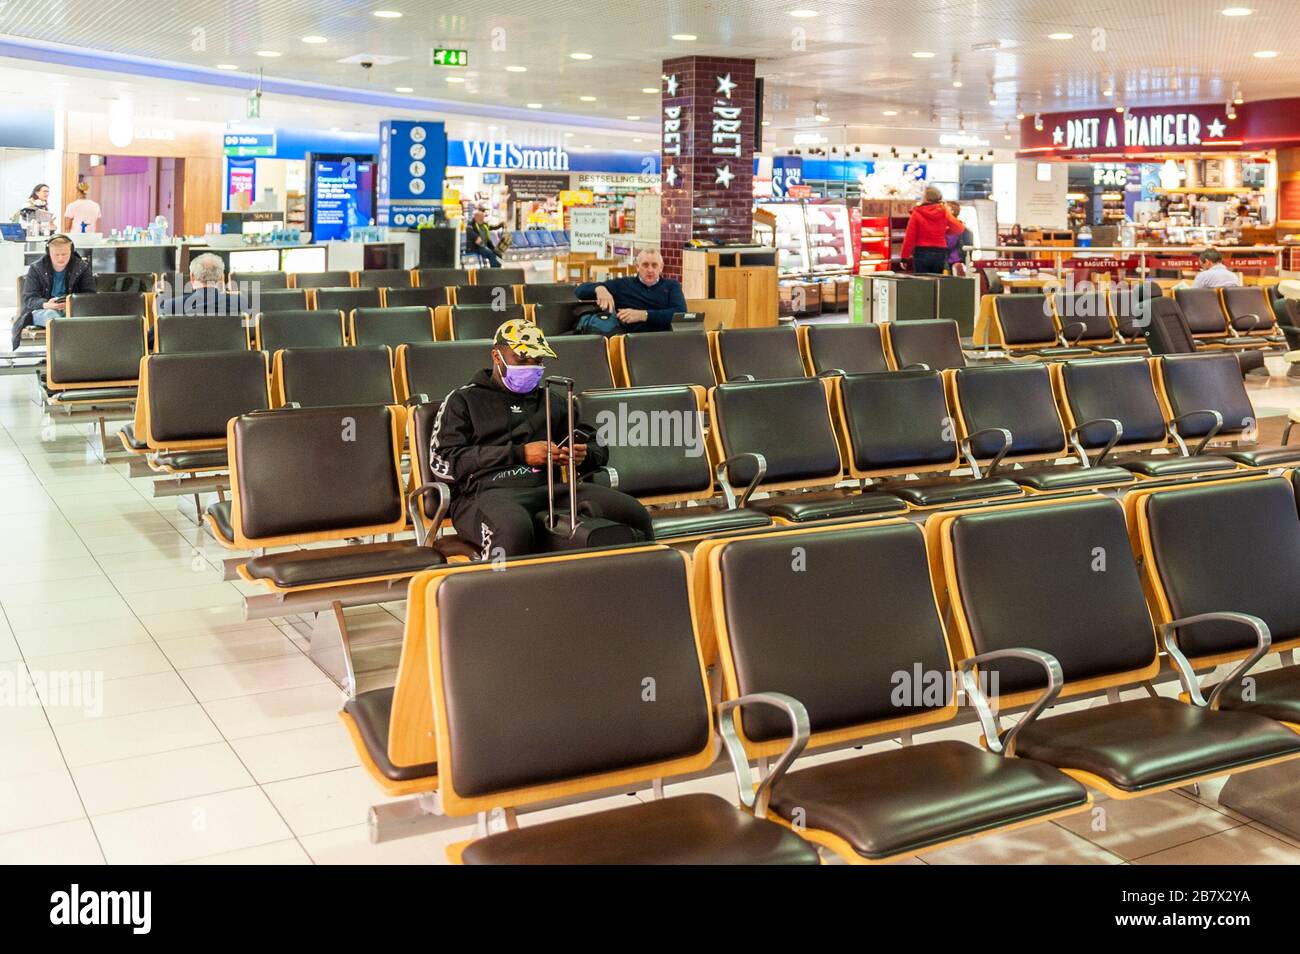 Birmingham, West Midlands, UK. 18th Mar, 2020. The departure lounge was deserted at Birmingham International Airport today as many people have chosen not to fly due to the Covid-19 pandemic. Flights have also been cancelled due to low passenger numbers. Credit: AG News/Alamy Live News Stock Photo